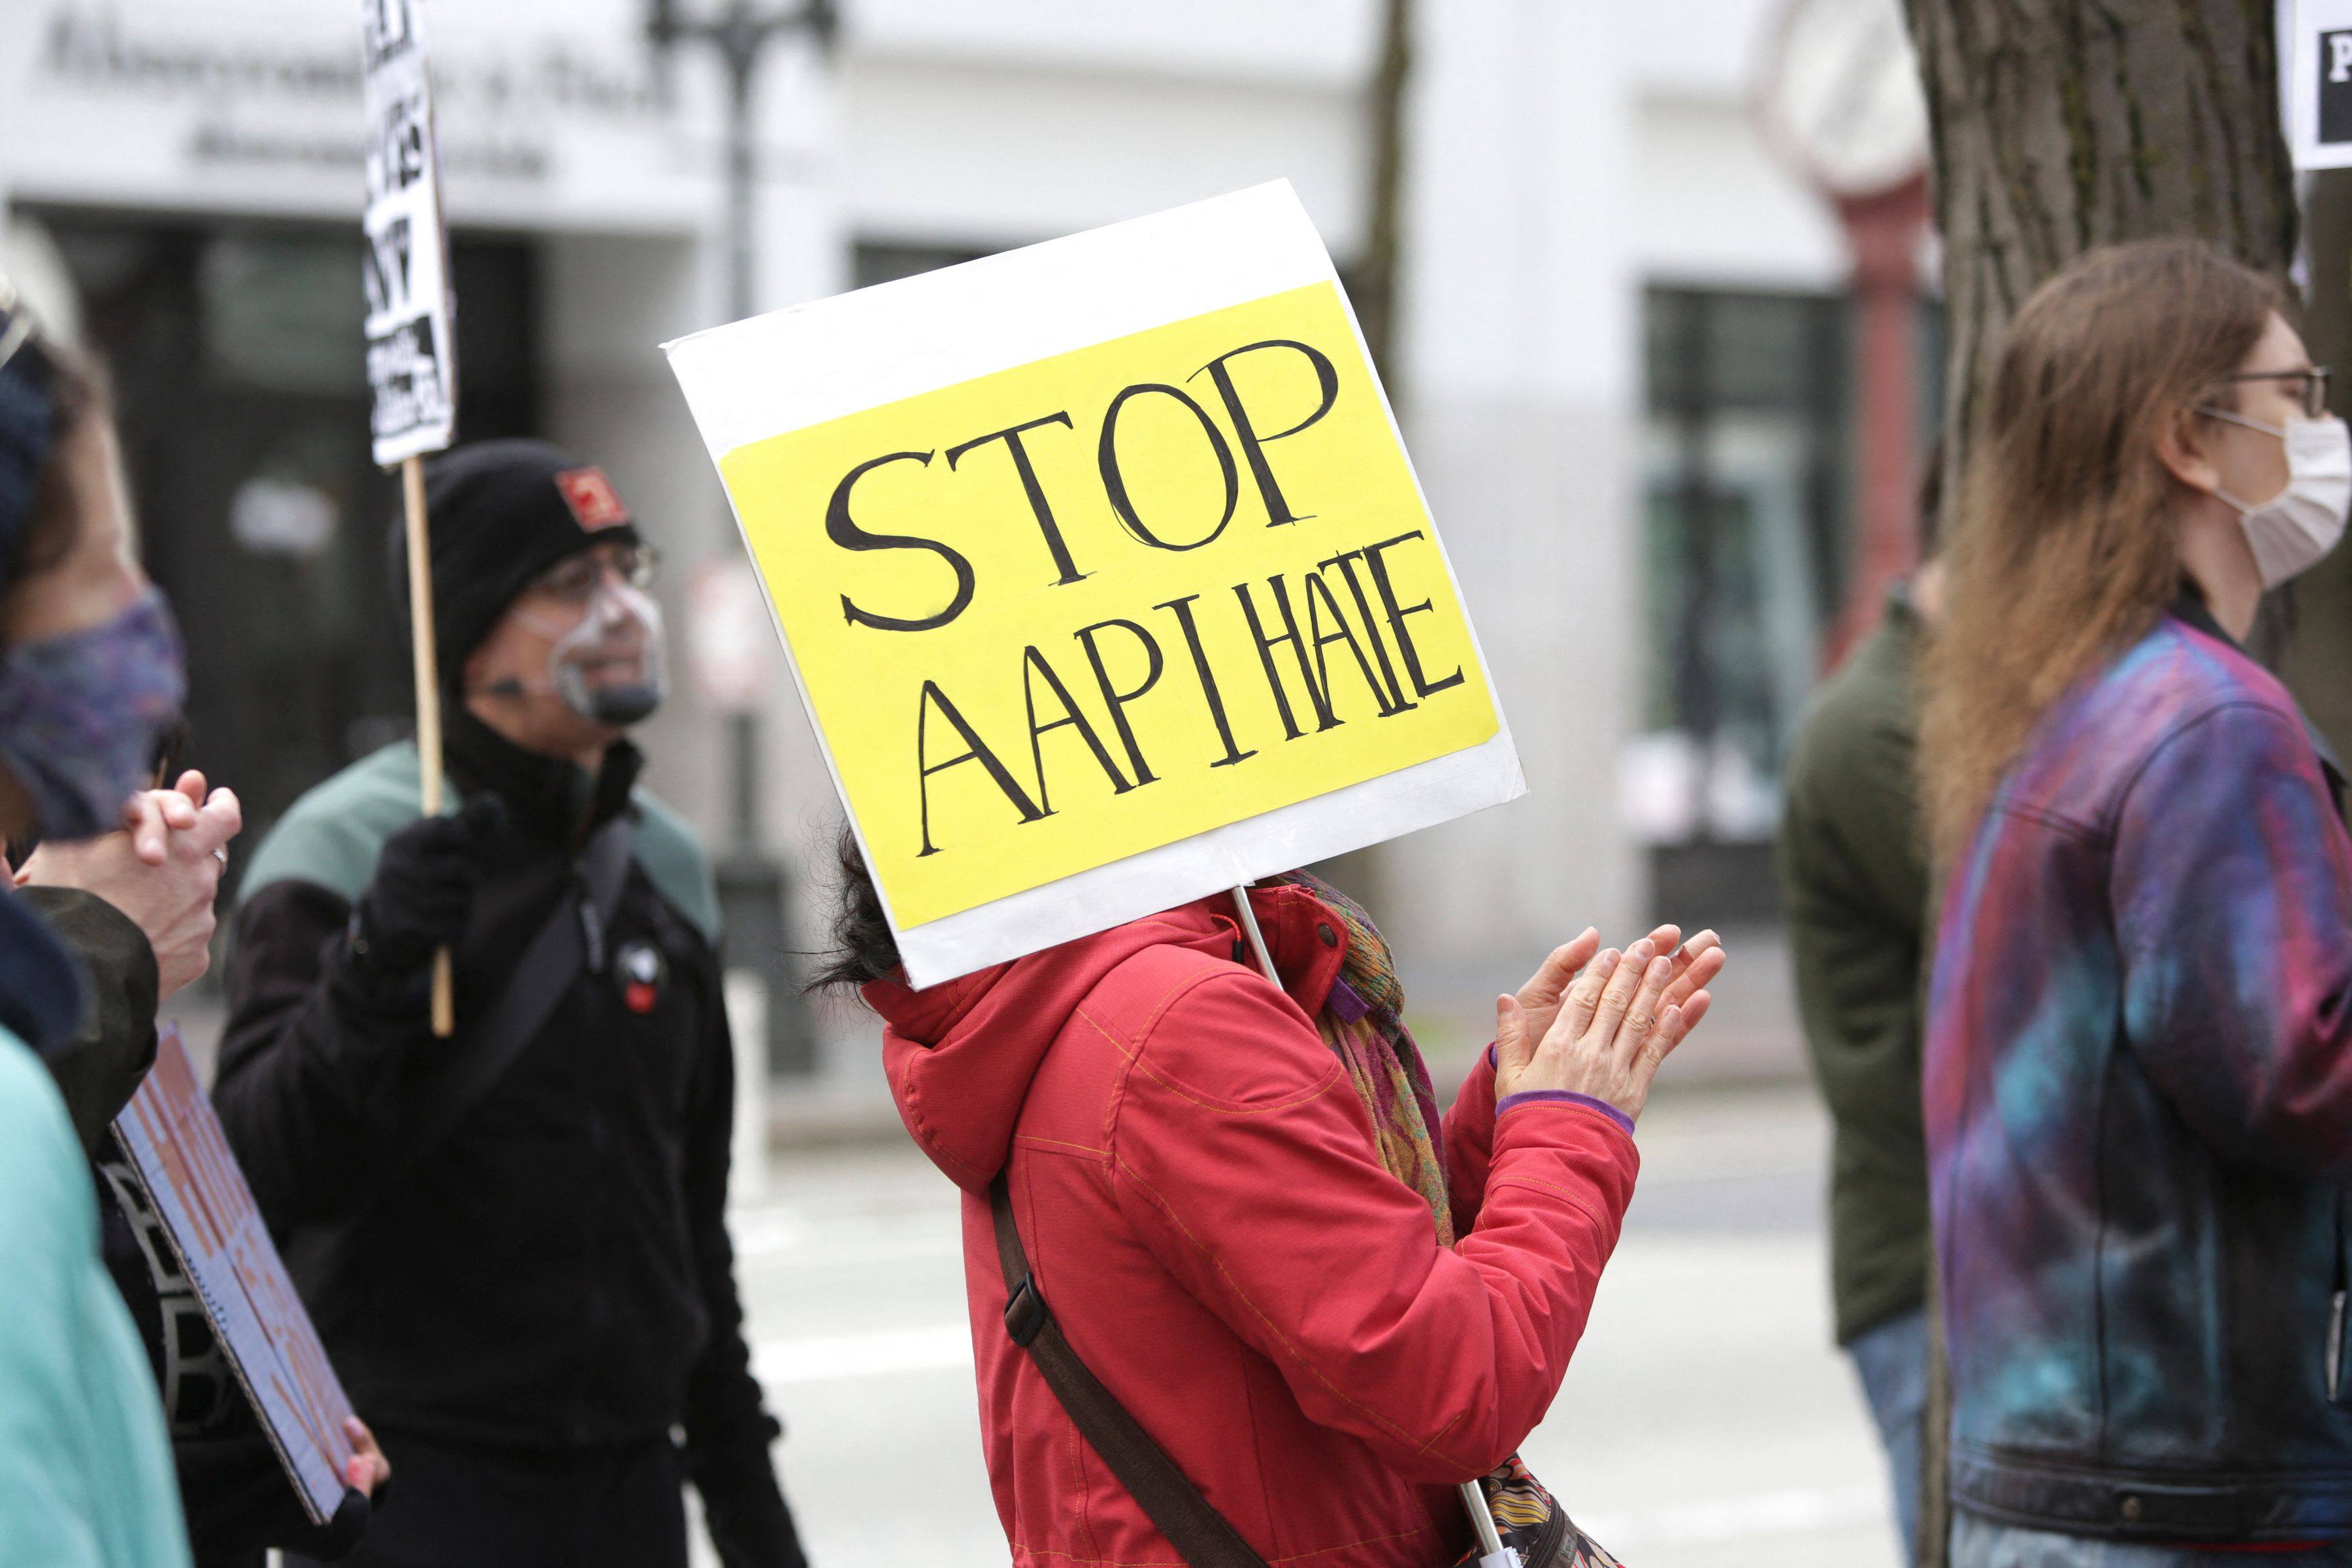 A demonstrator holds a sign calling for a stop to hate against Asian-Americans and Pacific Islanders in Seattle, Washington, on March 27, 2021. Photo: AFP